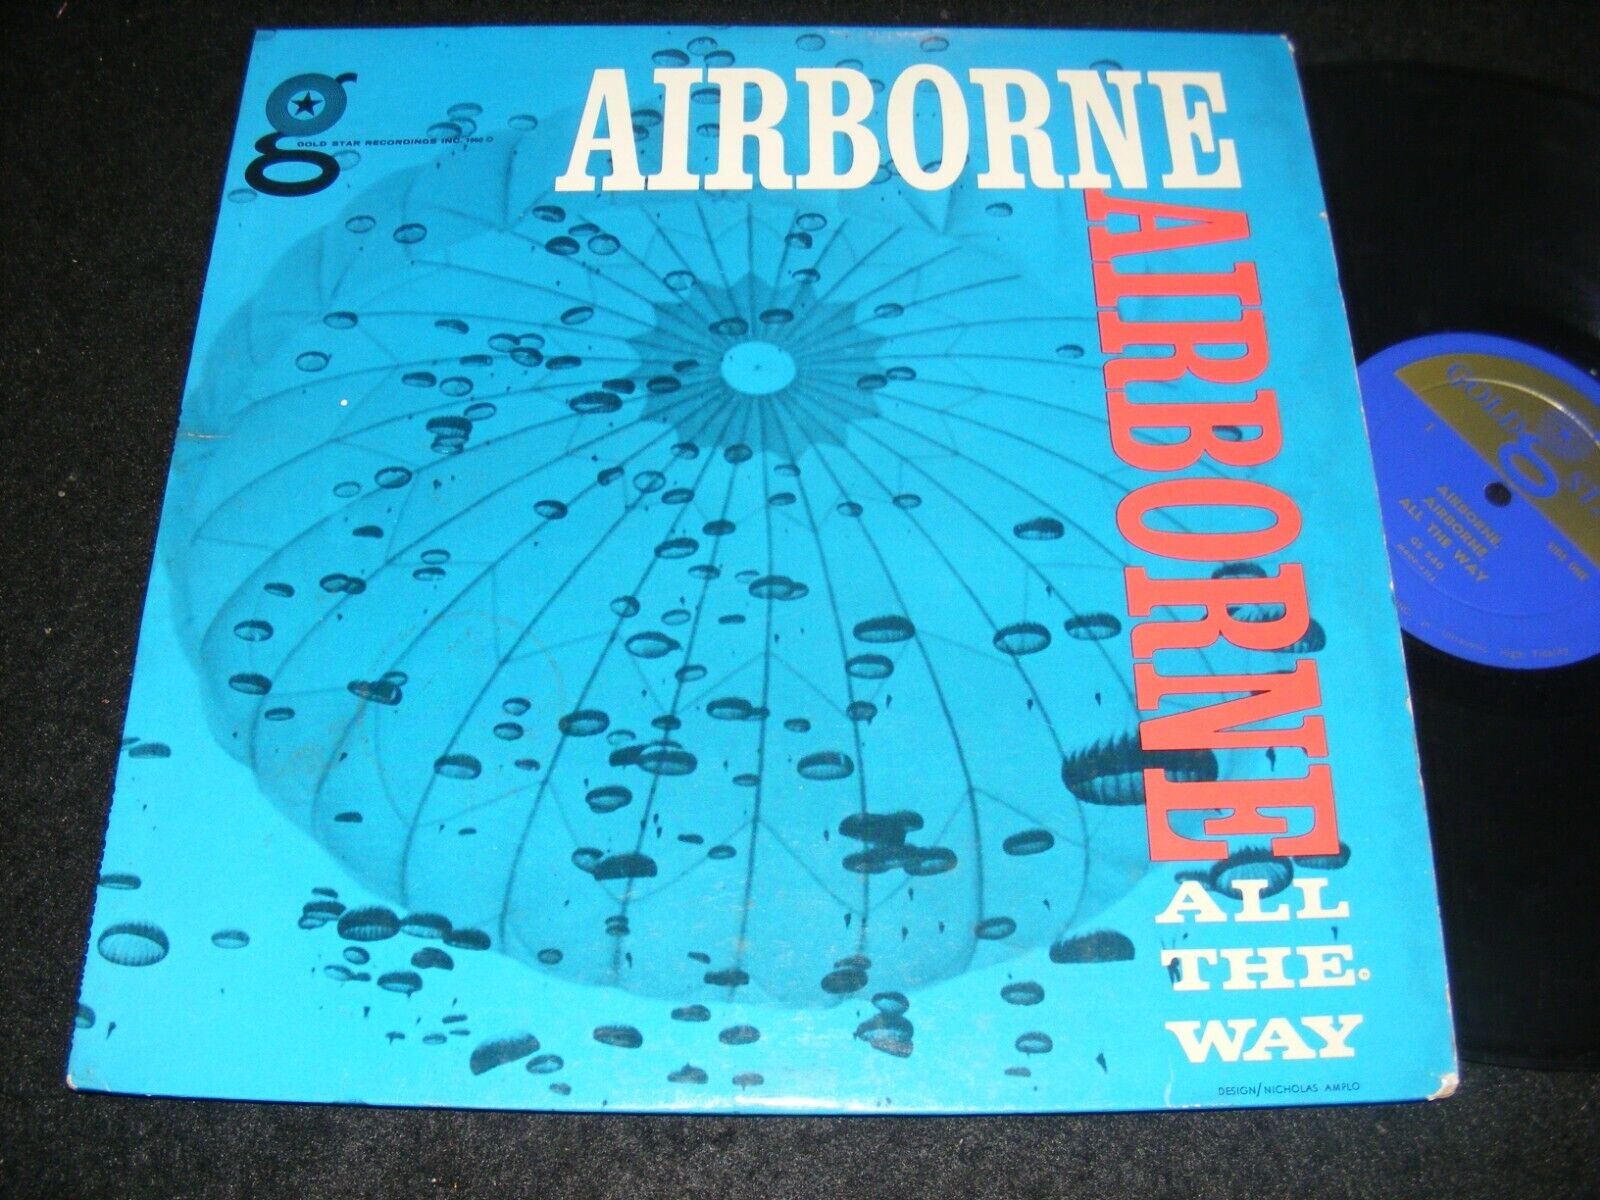 AIRBORNE All The Way U.S. ARMY Tribute LP Displayable Parachute Cover FT BENNING